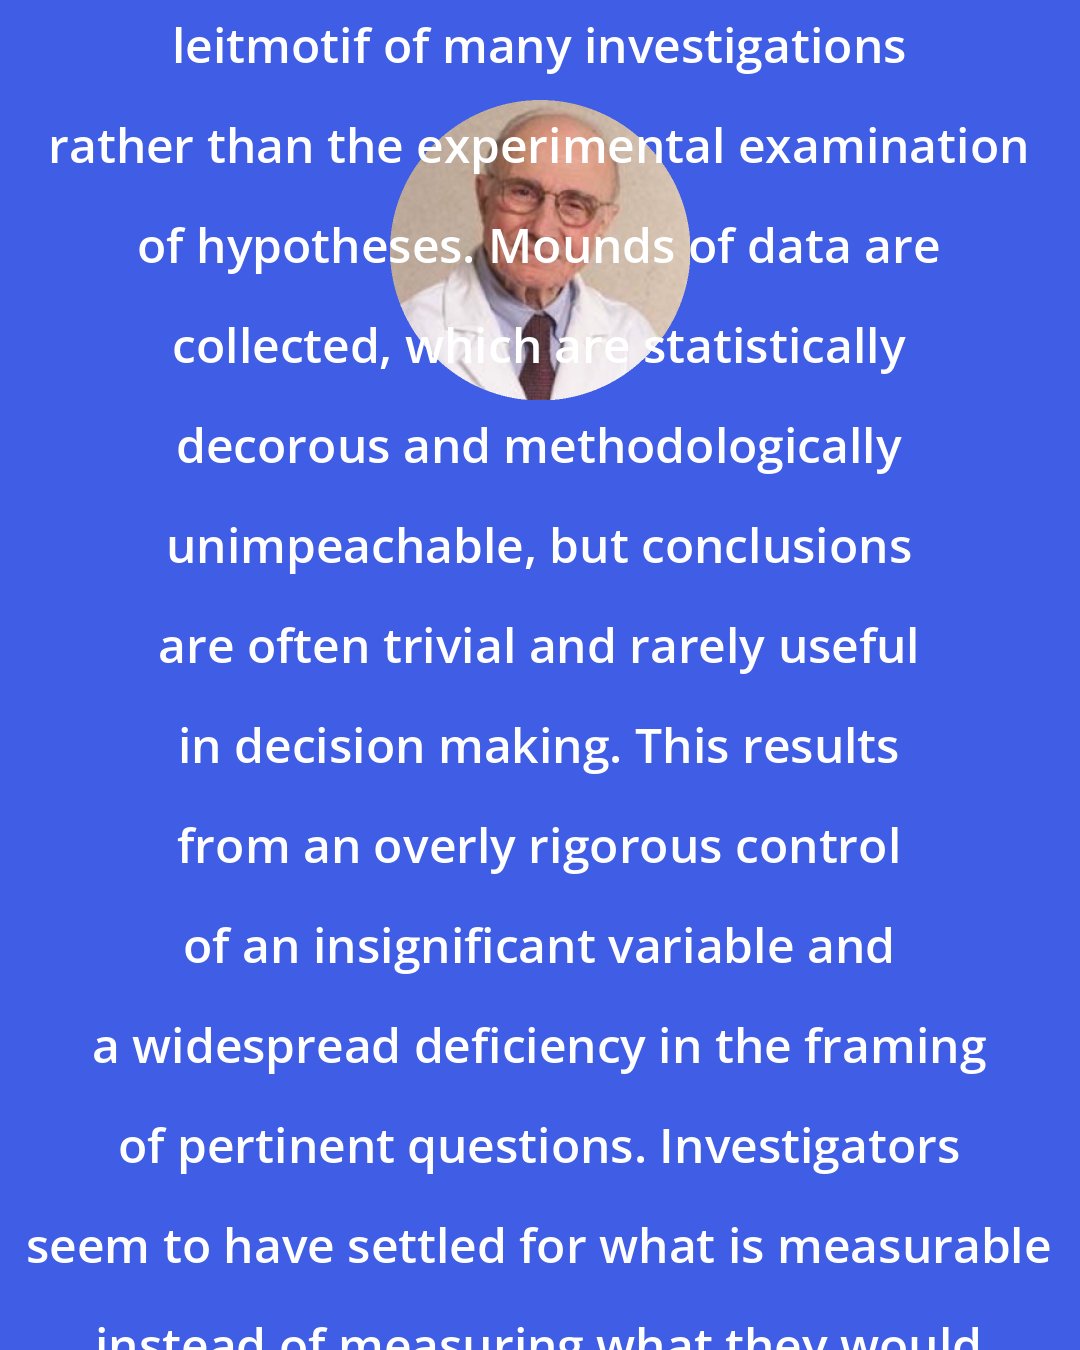 Edmund Pellegrino: Measurement has too often been the leitmotif of many investigations rather than the experimental examination of hypotheses. Mounds of data are collected, which are statistically decorous and methodologically unimpeachable, but conclusions are often trivial and rarely useful in decision making. This results from an overly rigorous control of an insignificant variable and a widespread deficiency in the framing of pertinent questions. Investigators seem to have settled for what is measurable instead of measuring what they would really like to know.